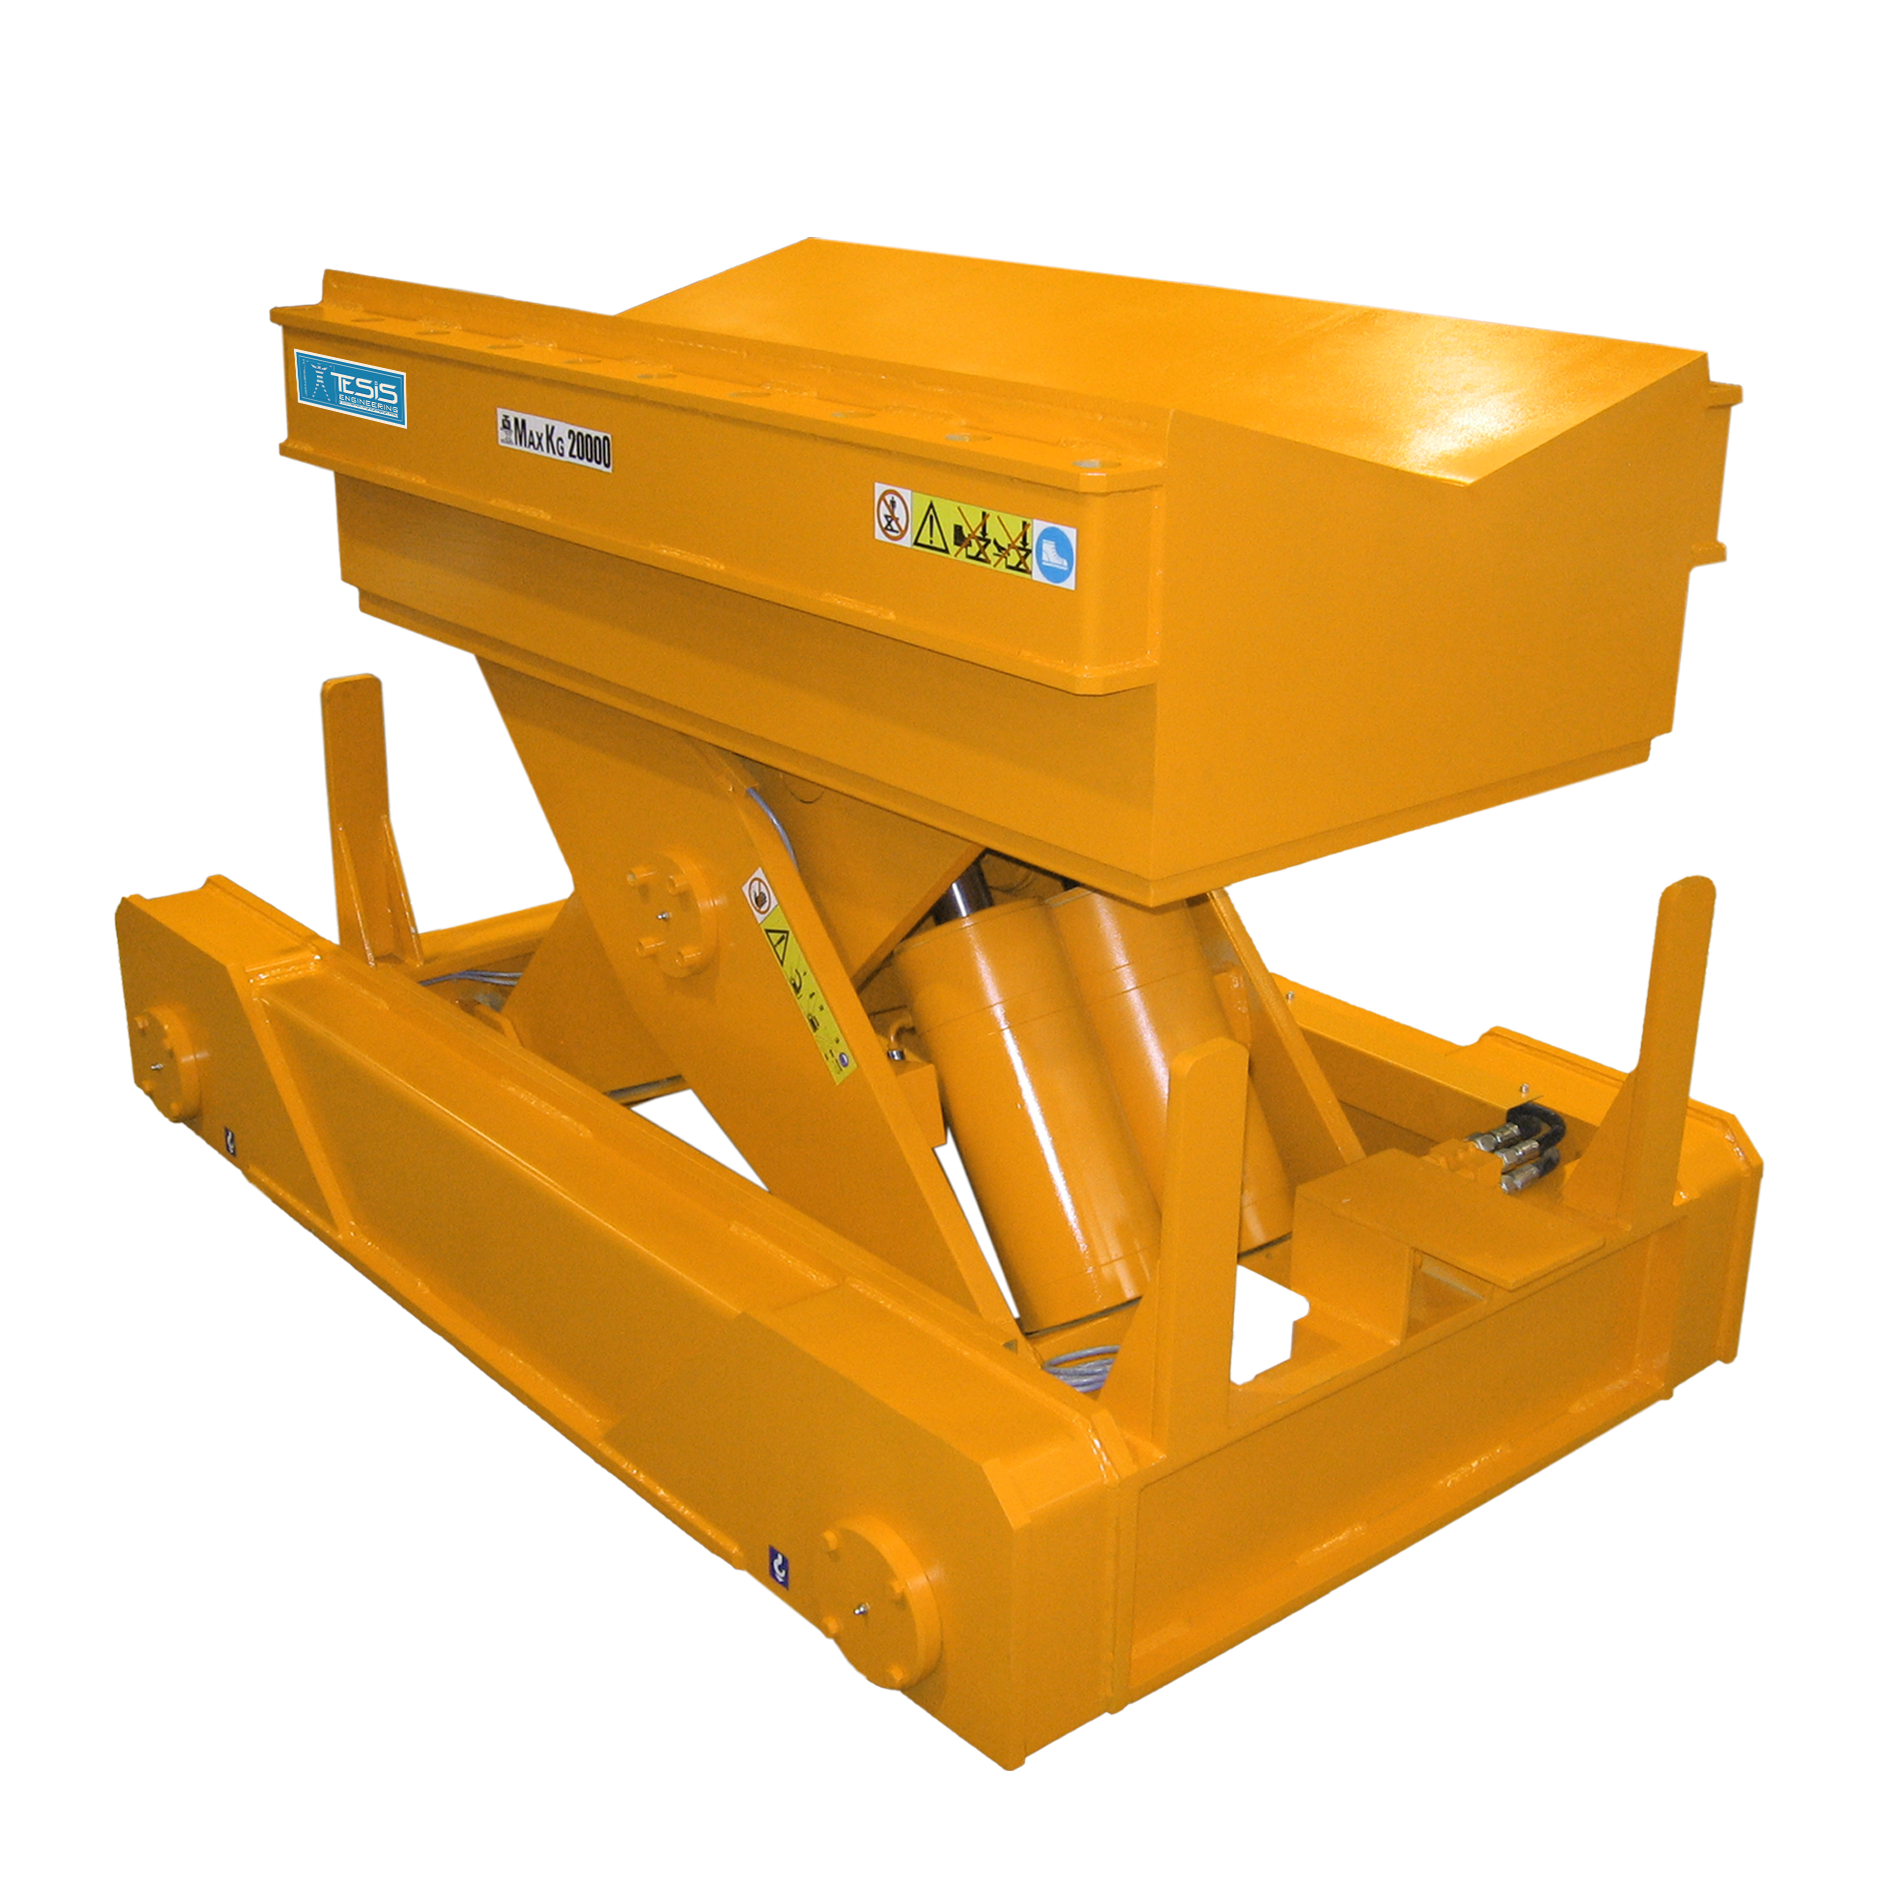 Self-propelled lifting platform with motorized traverse on rails and cradle platform - coil transfer car - coil handling - roll handling - powered traverse lift tables - cradle top lift tables